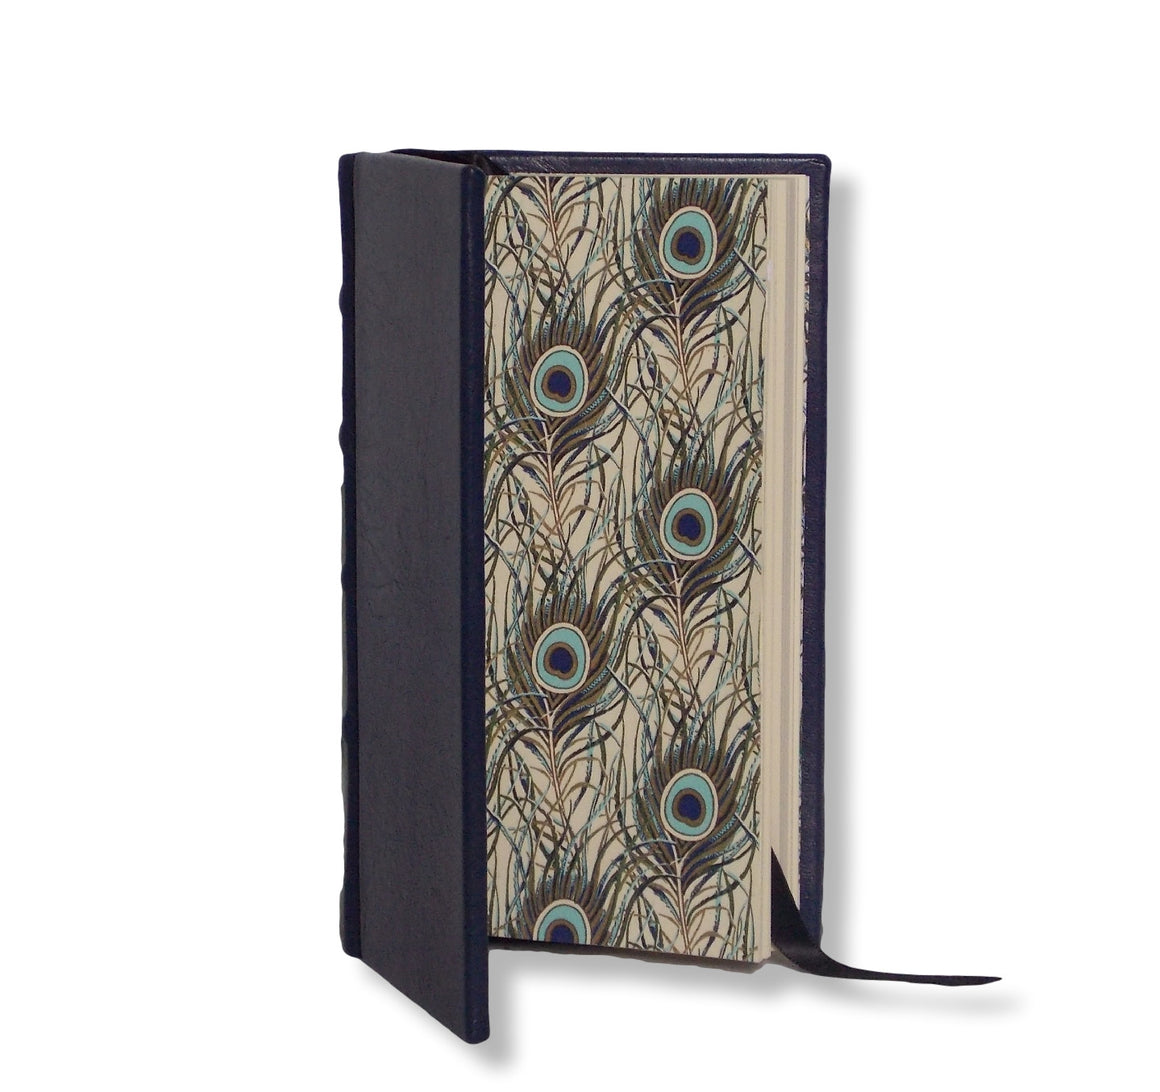 Navy leather slimline journal with peacock design end papers